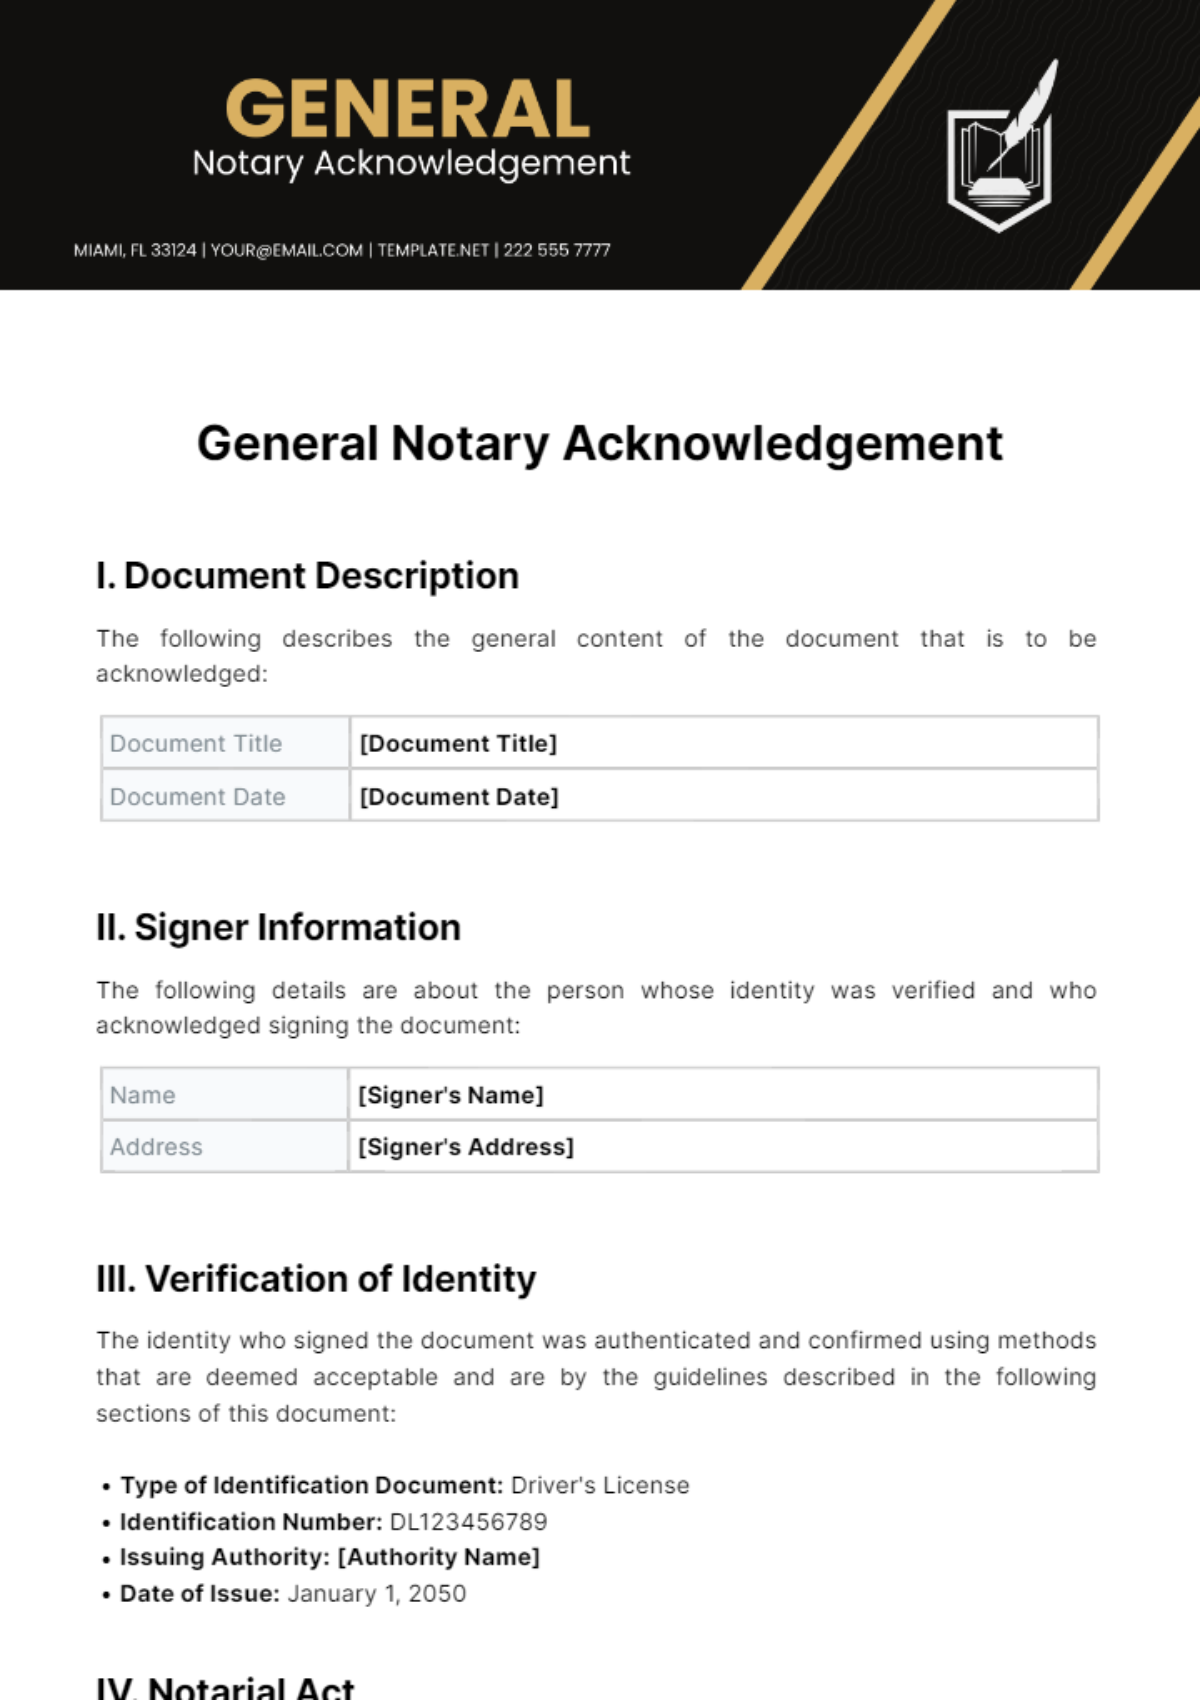 General Notary Acknowledgement Template